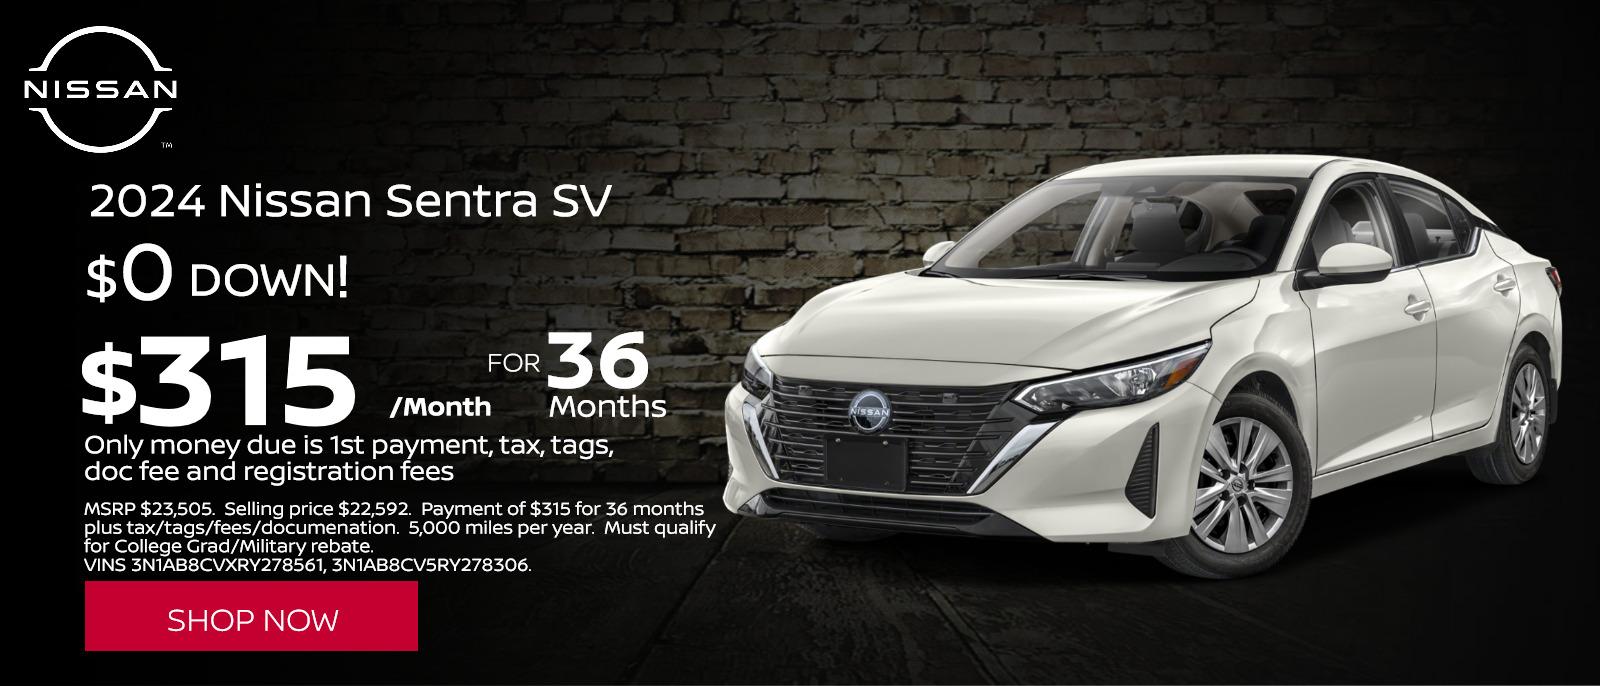 Lease a Sentra SV